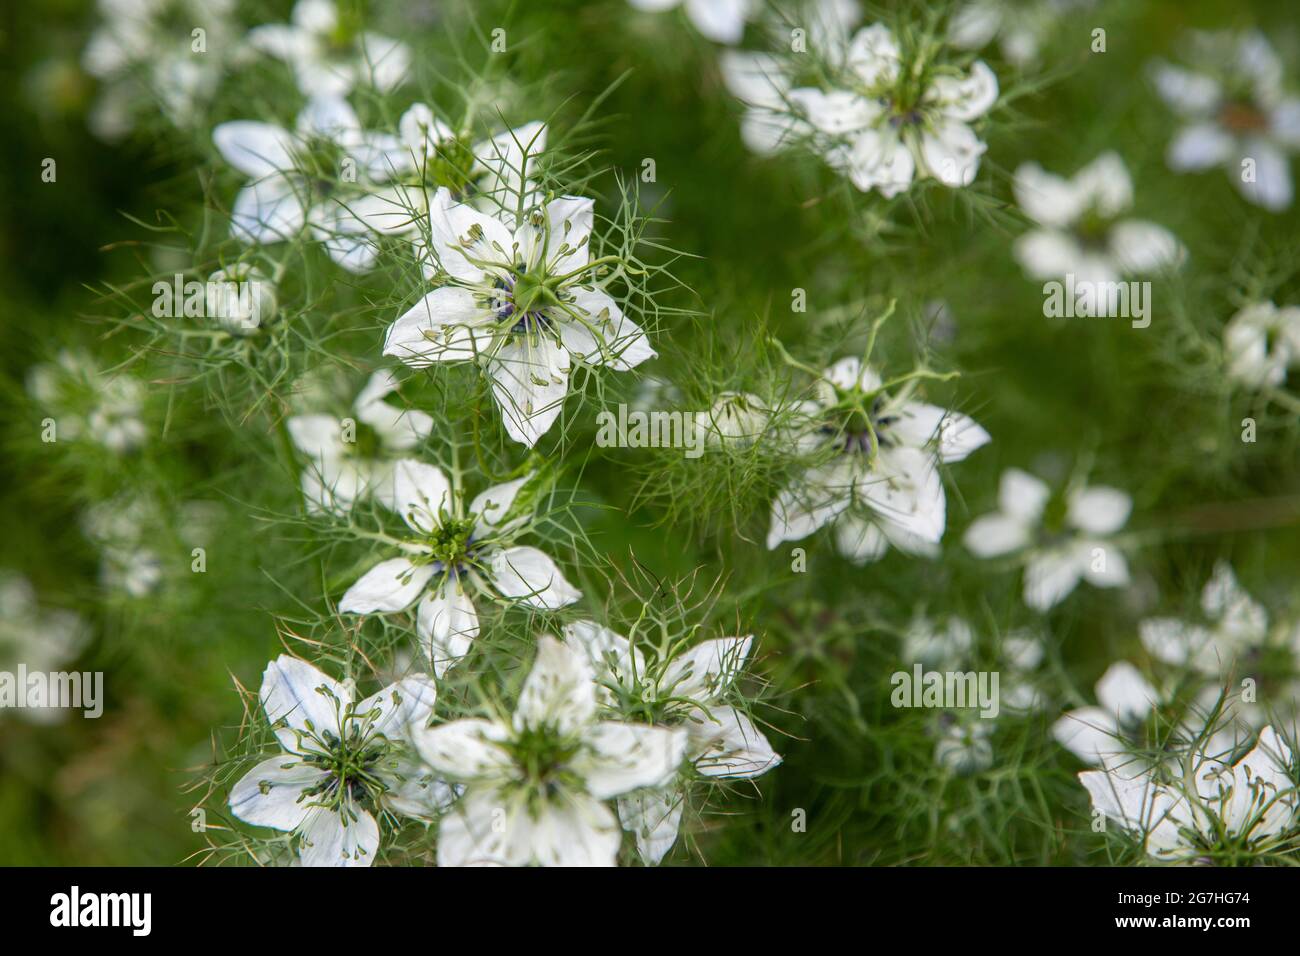 Nigella damascena (black caraway, black cumin) is an annual flowering plant in the family Ranunculaceae. Its seeds are not only used for their flavour Stock Photo